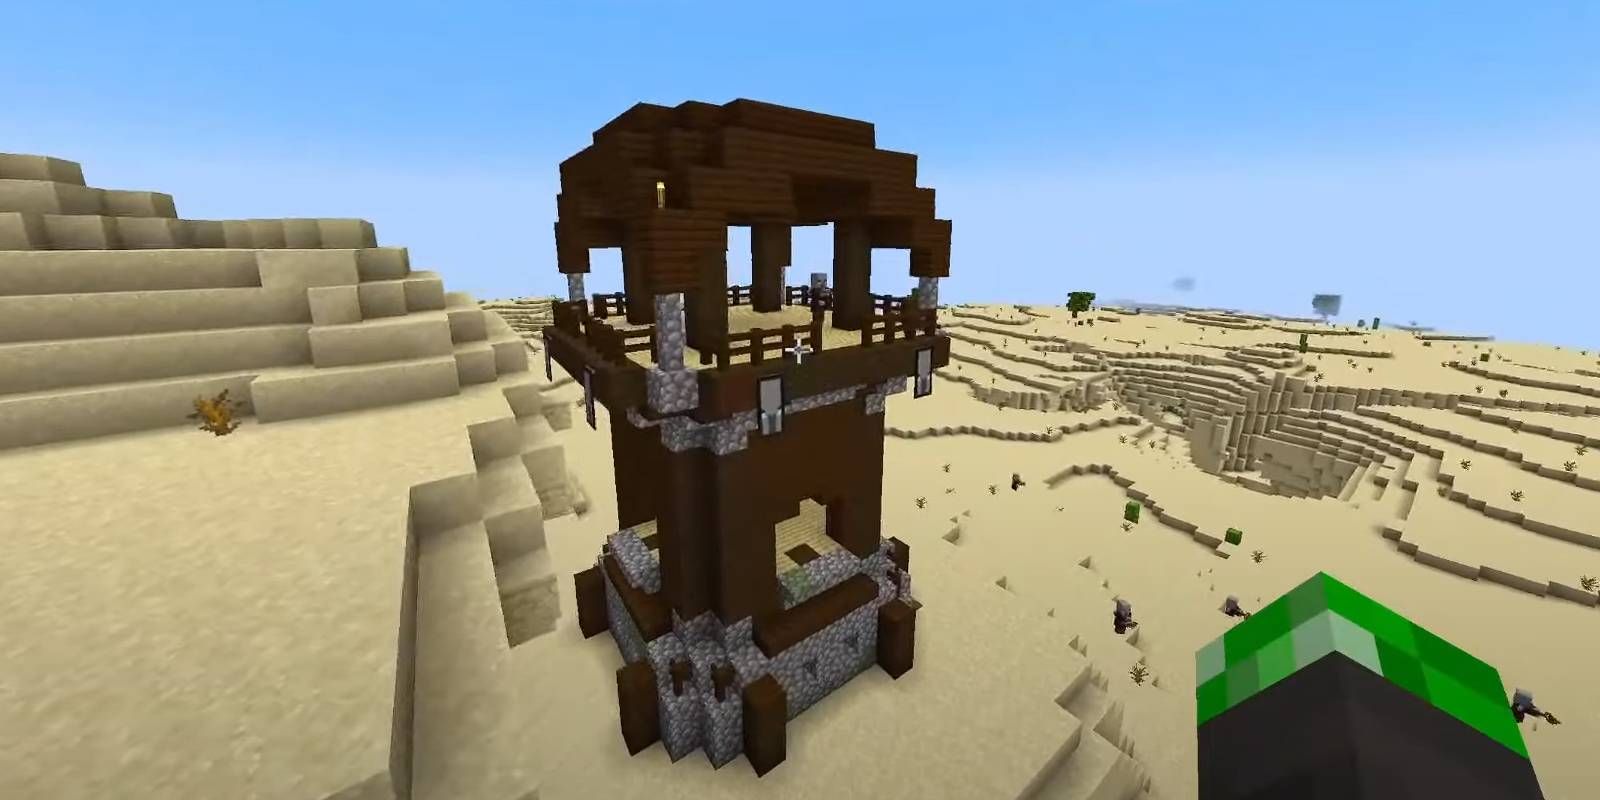 Minecraft Desert Pillager Outpost from World Seed with Resources for Speedrun